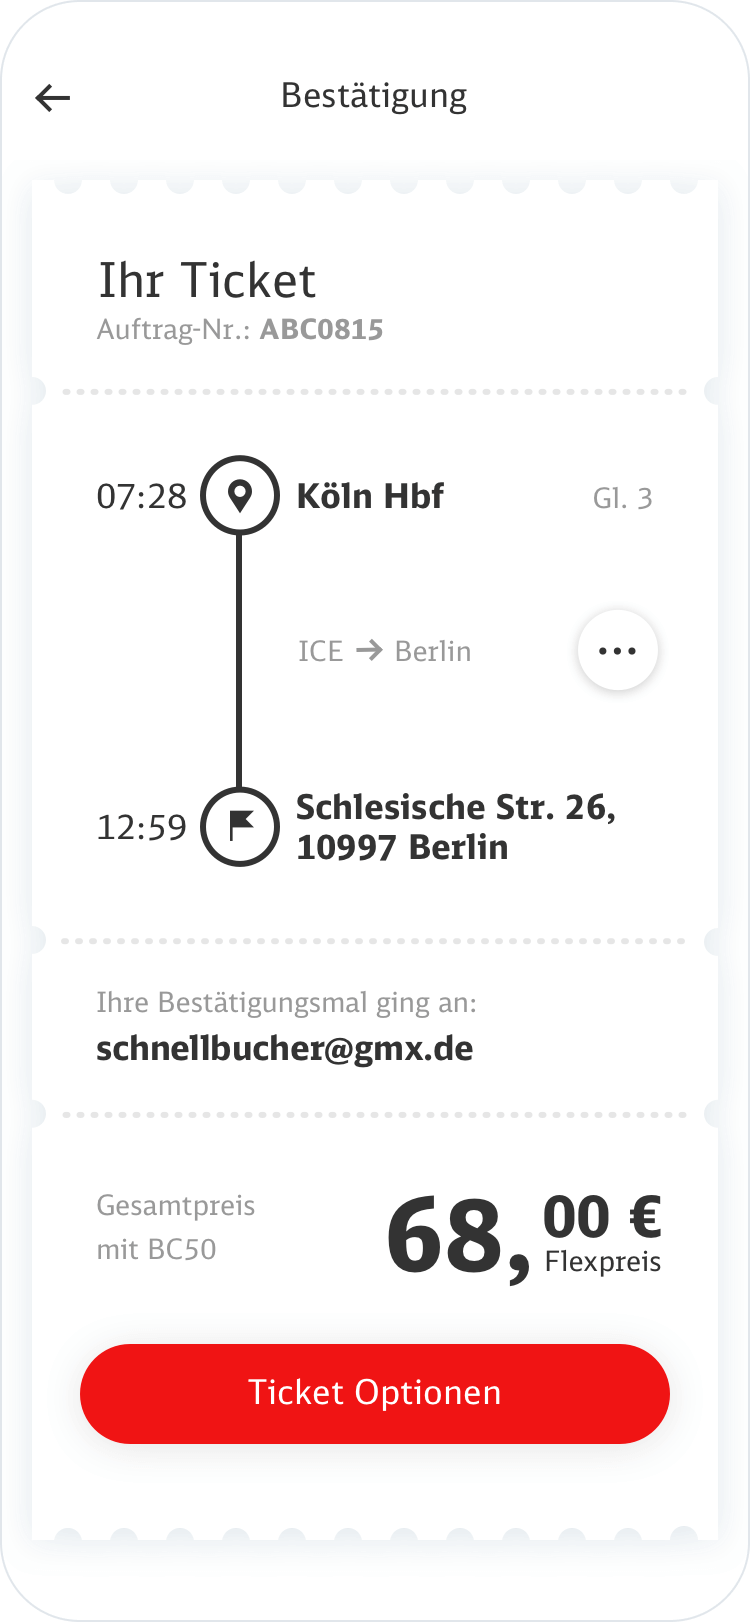 Ticket page with detail information about the travel